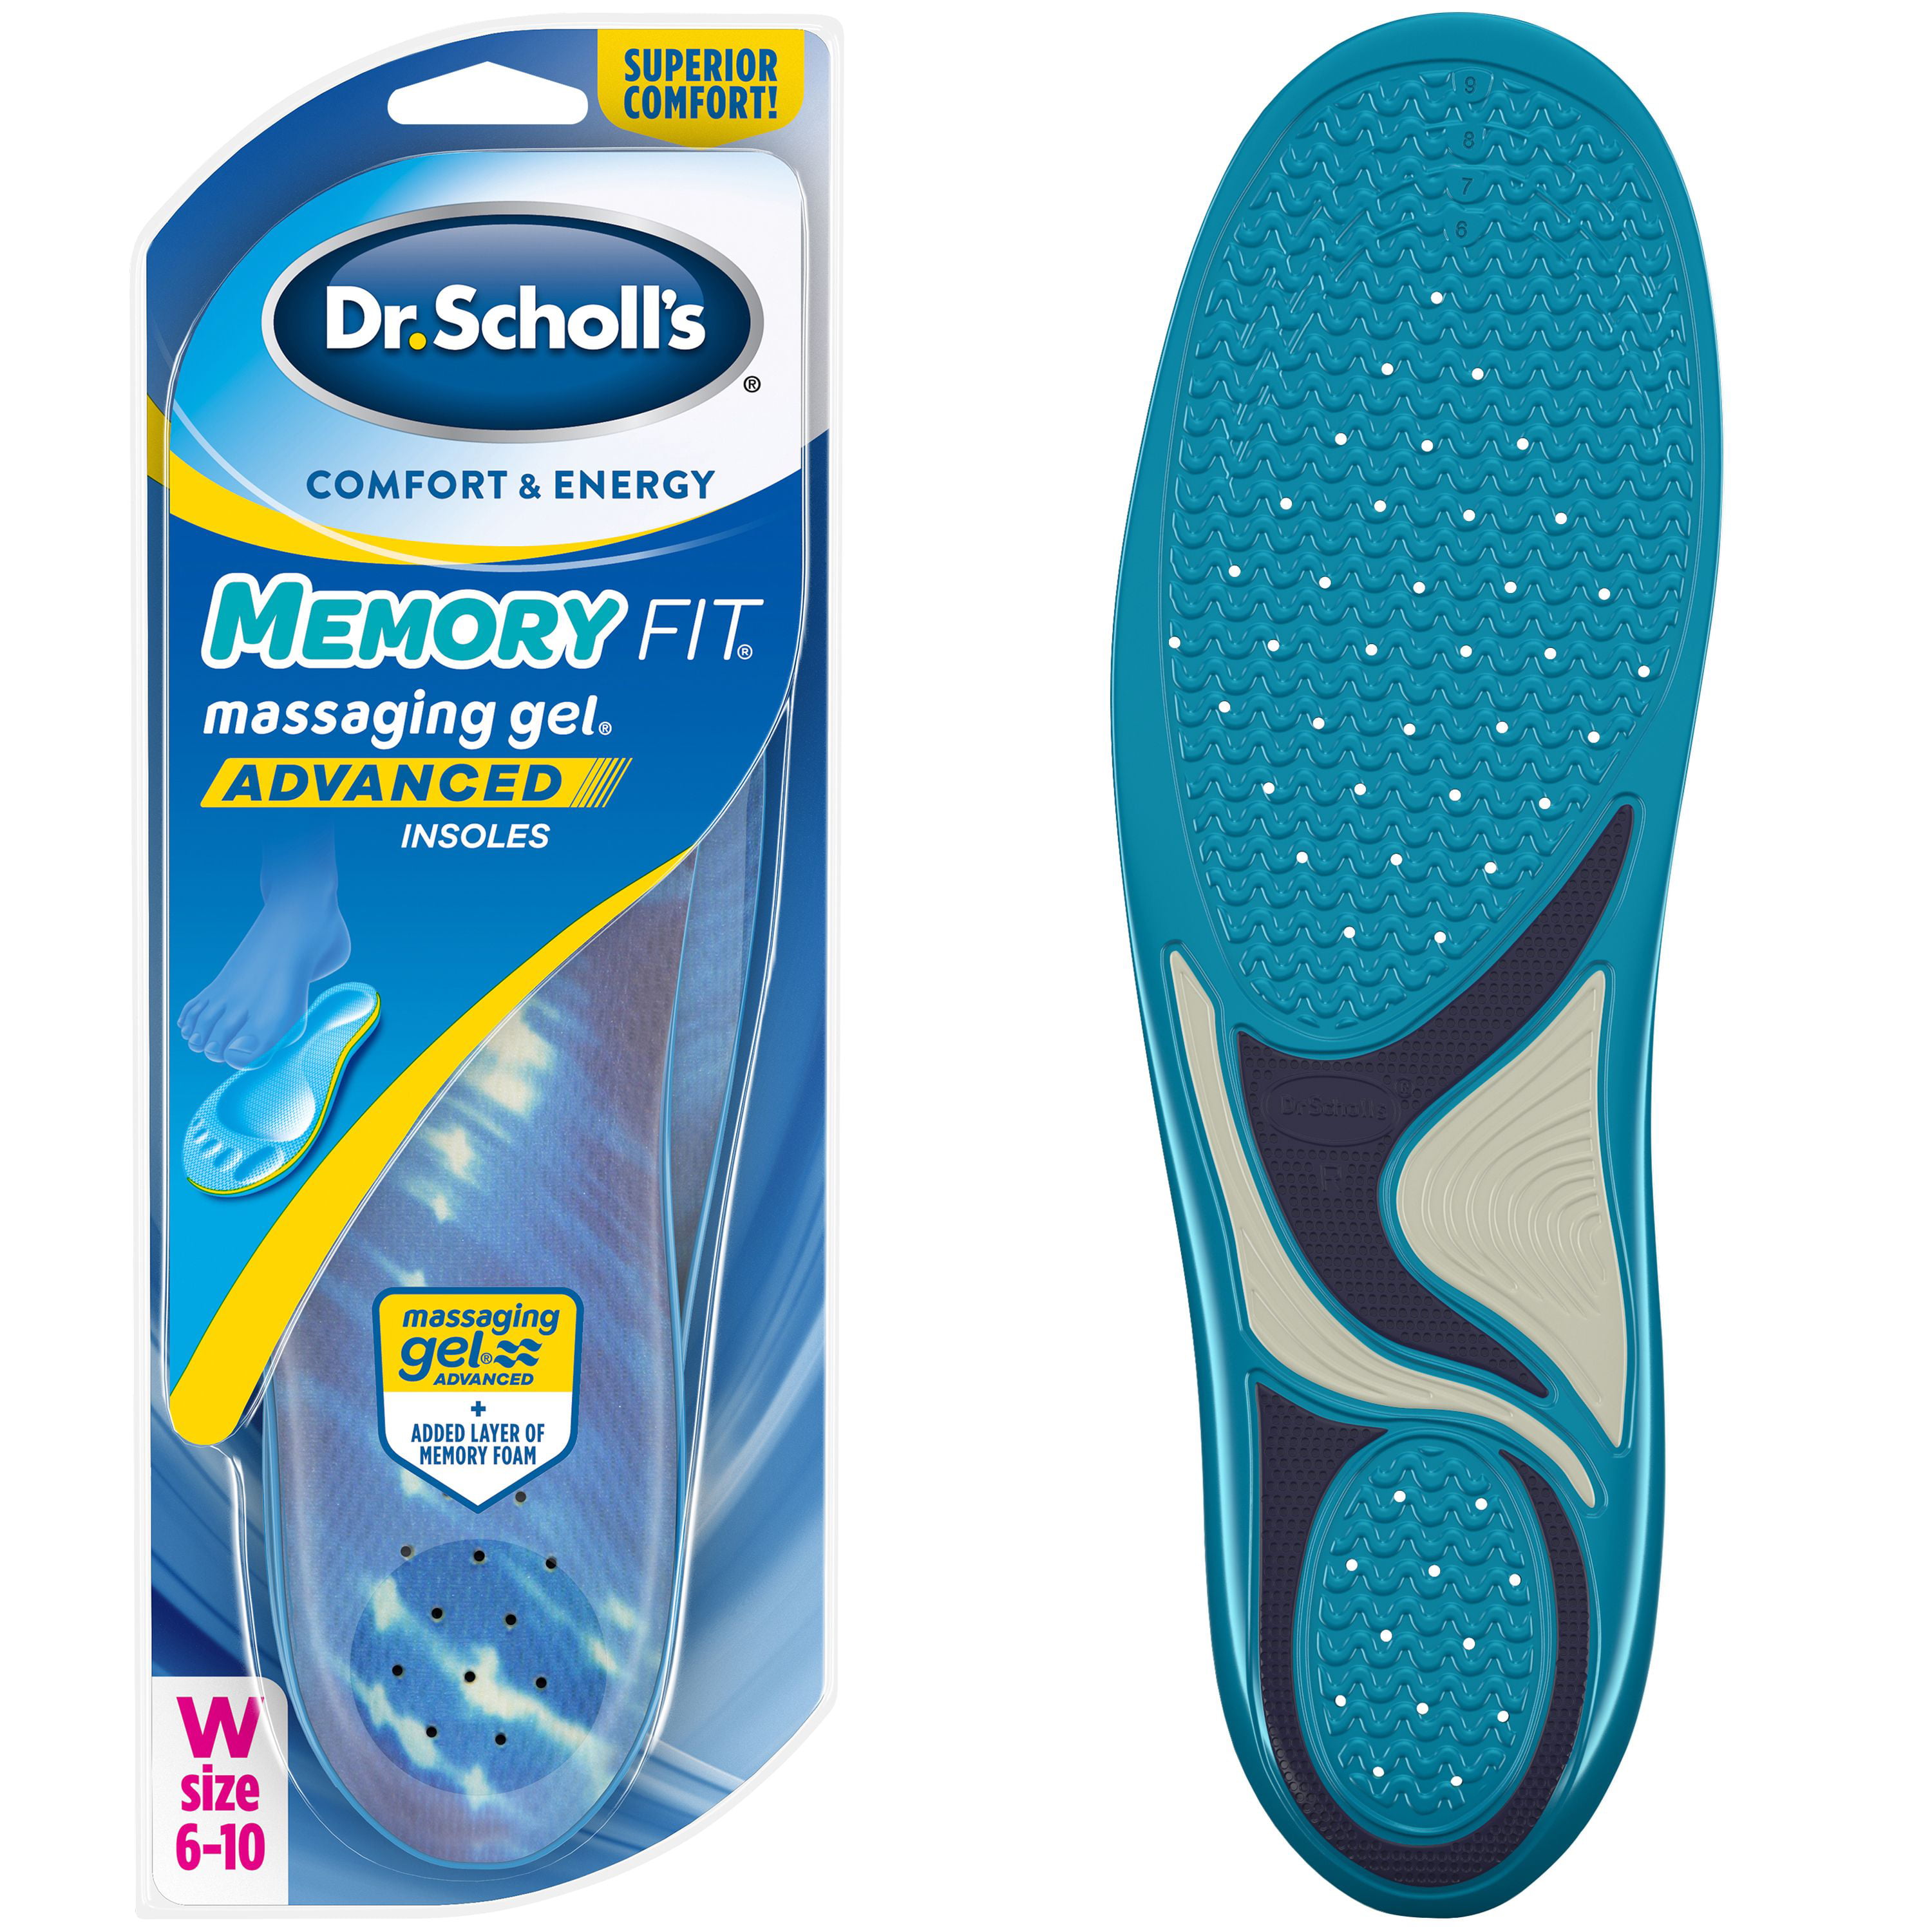 Dr. Scholl's MEMORY FIT Insoles with Massaging Gel Advanced, 1 Pair ...